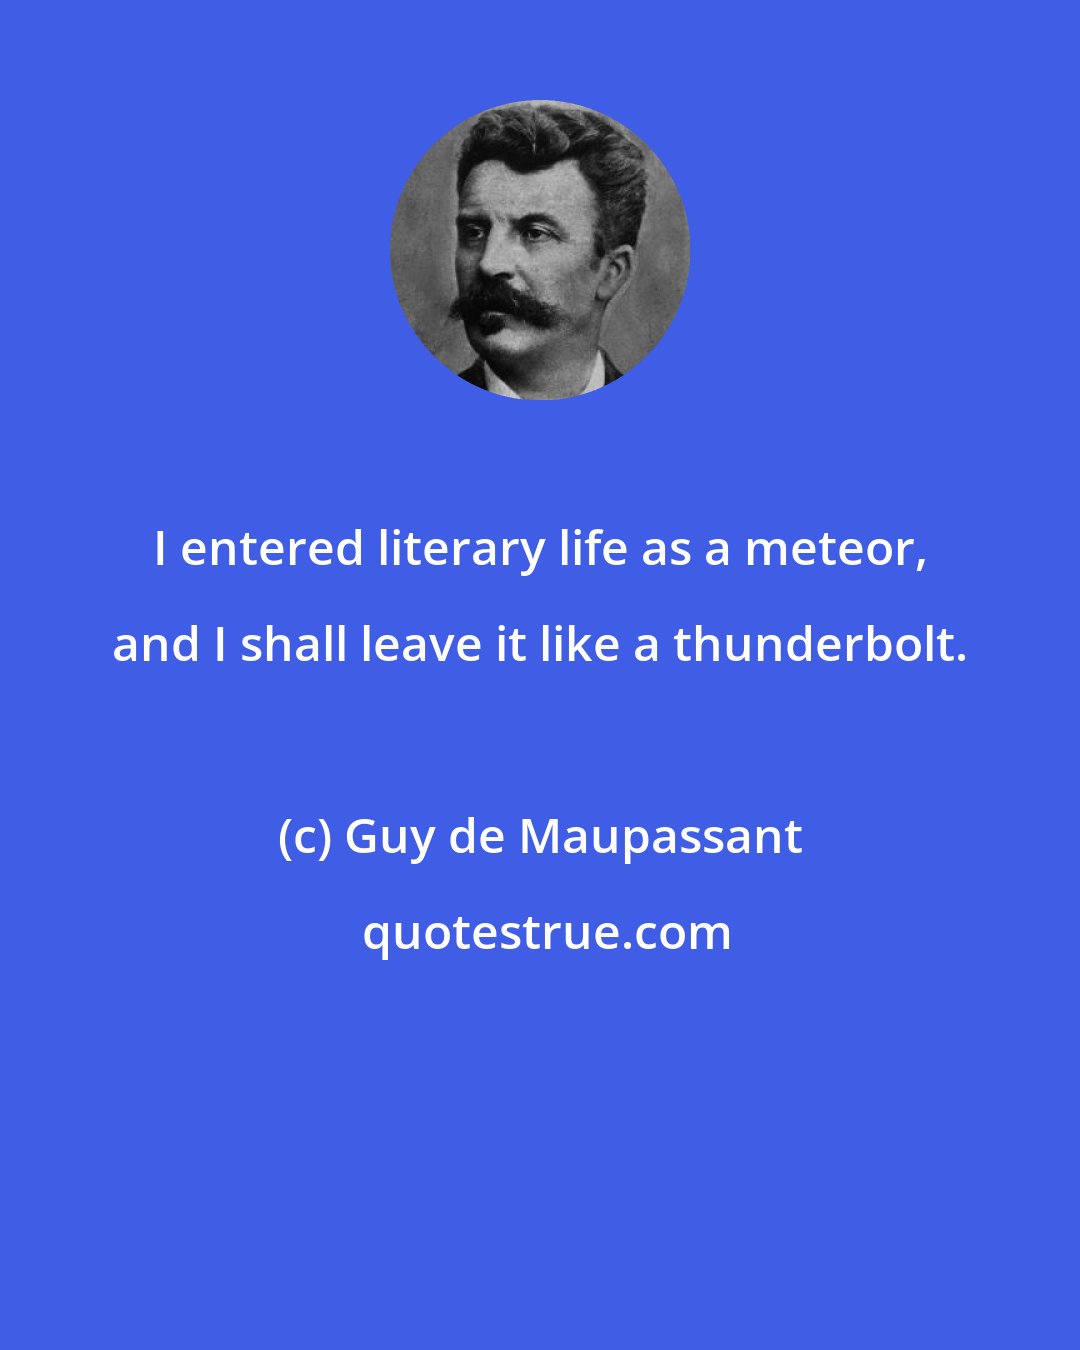 Guy de Maupassant: I entered literary life as a meteor, and I shall leave it like a thunderbolt.